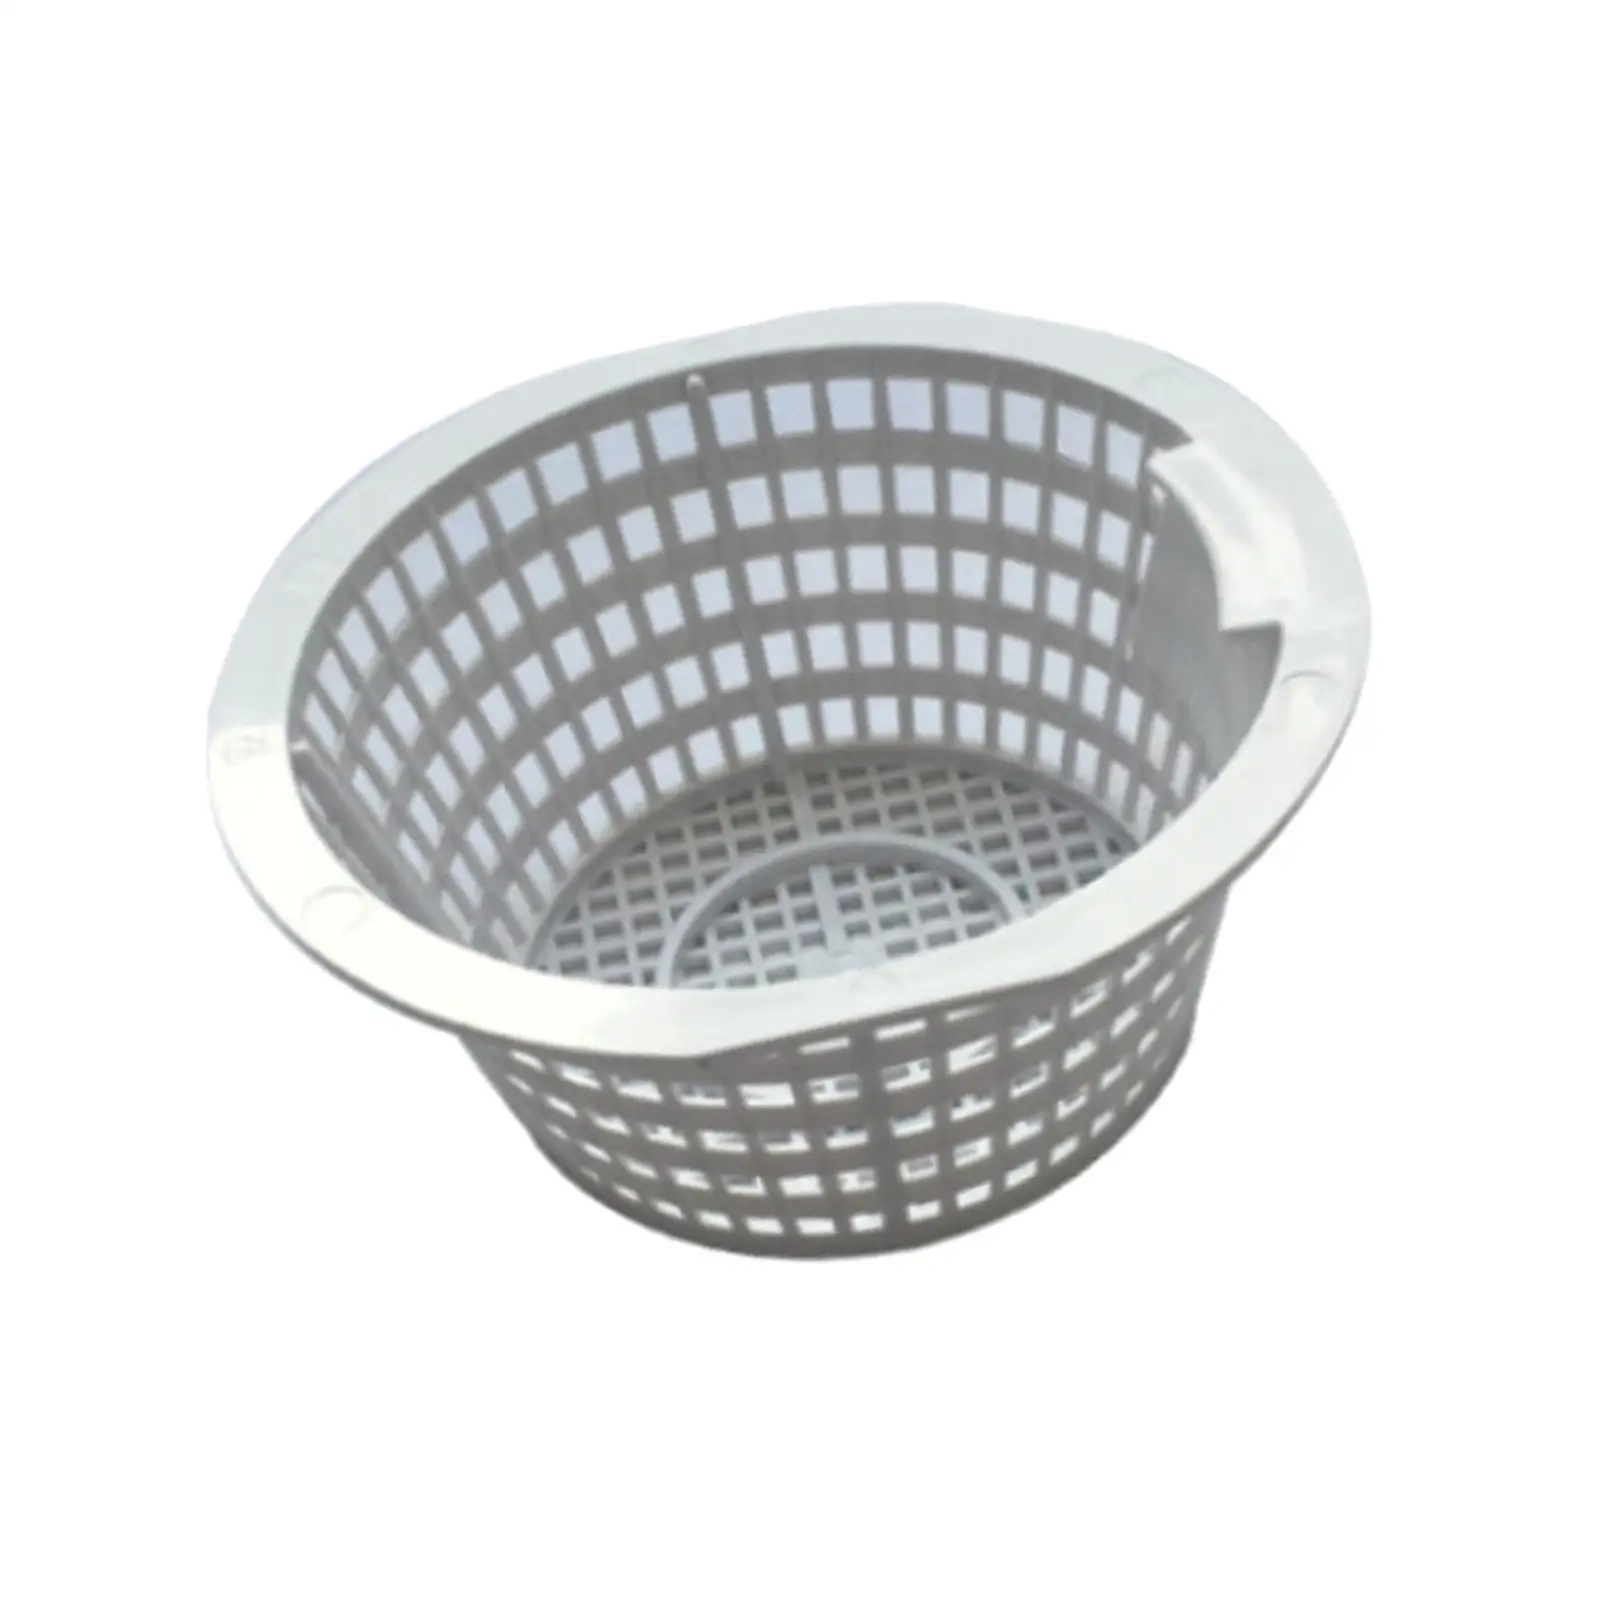 Pool Skimmer Basket Reusable Fittings Cleaning Tool Portable Aboveground Cleaner Catcher for Cleaning Scum Swimming Pool Debris